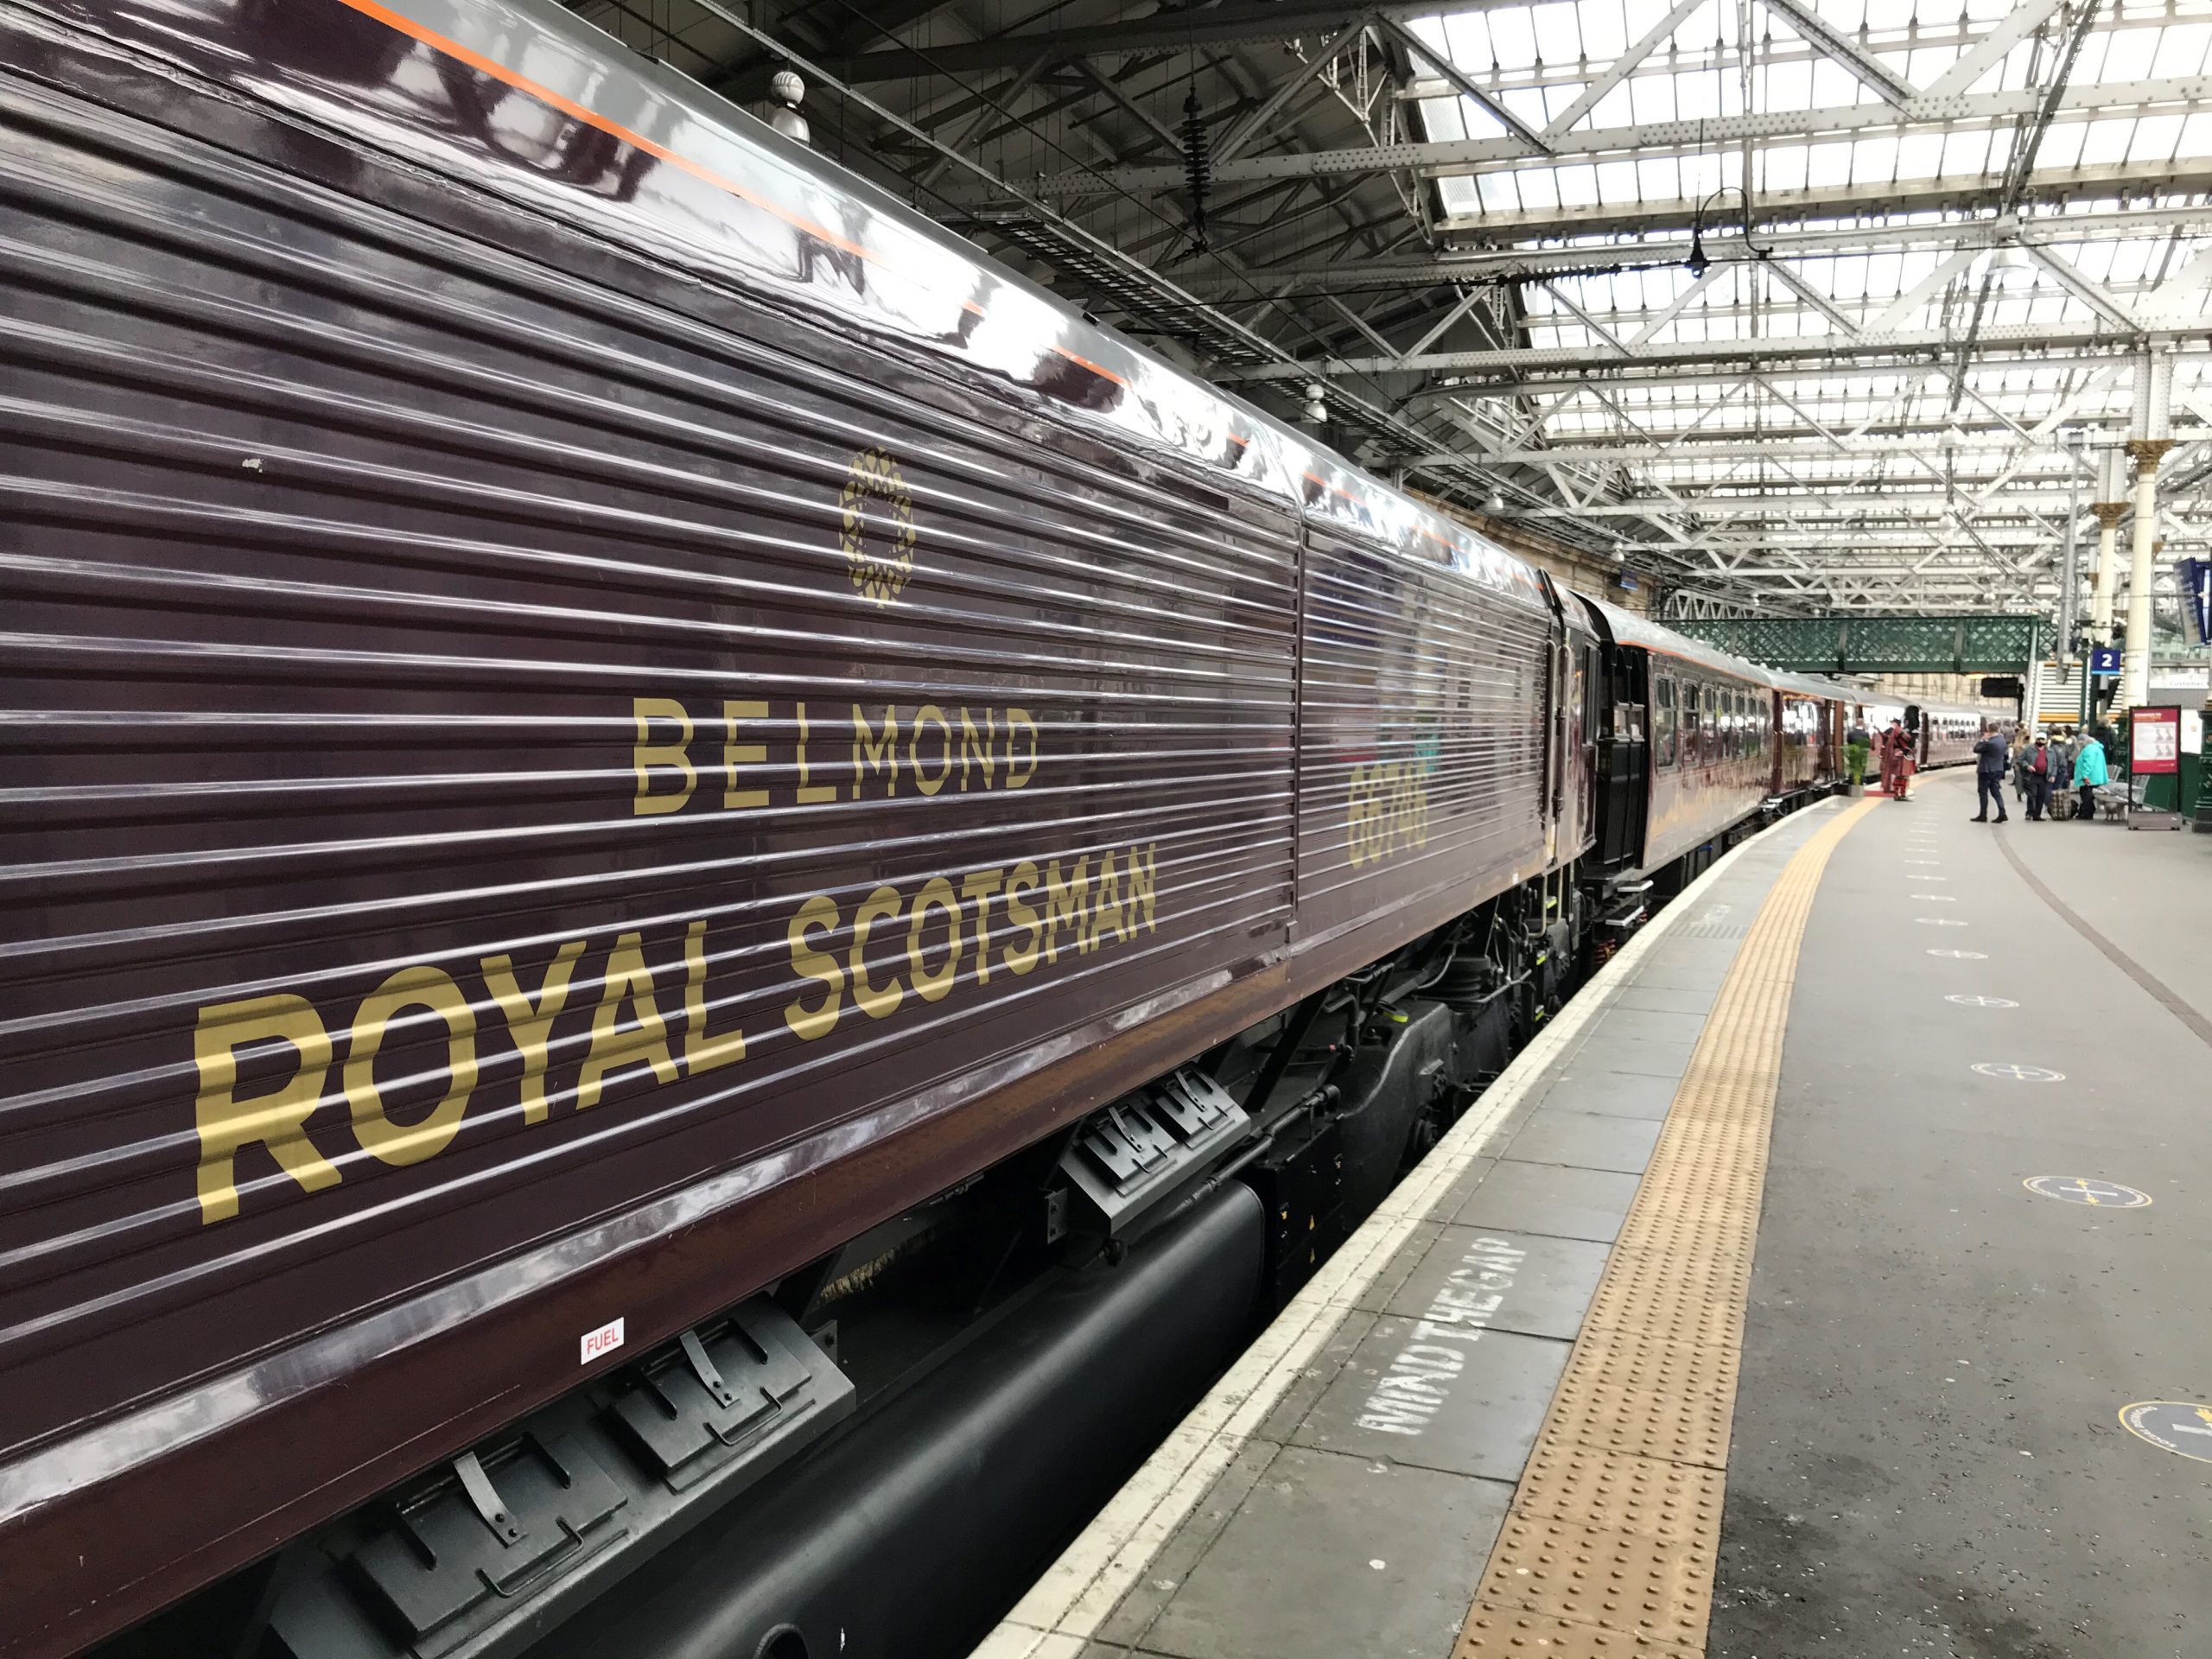 GBRf extend contract with Belmond for Royal Scotsman, A Belmond Train, Scotland’s haulage